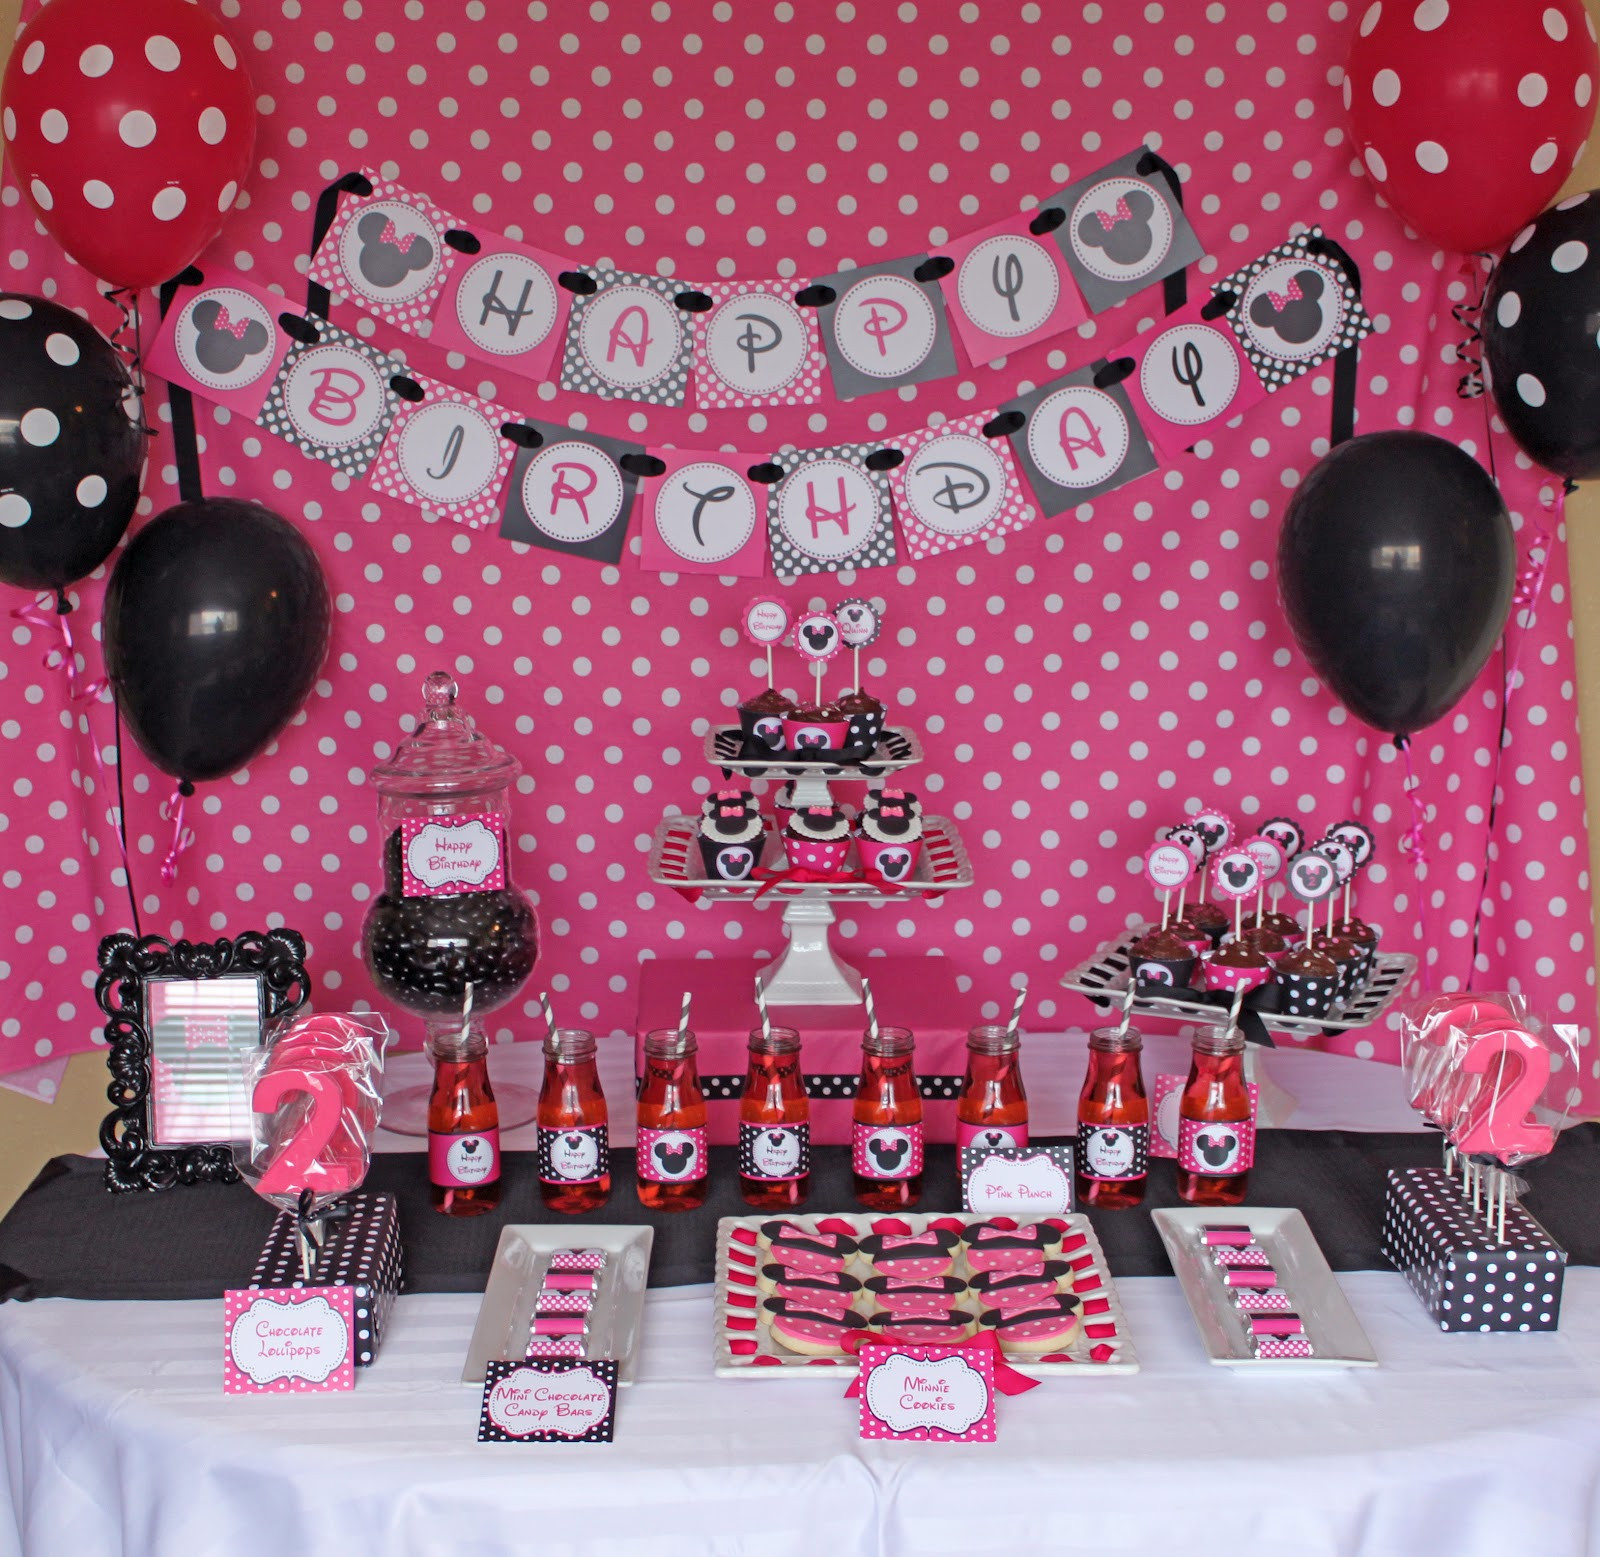 Minnie Mouse Birthday Decorations
 Minnie Mouse Party Decorations